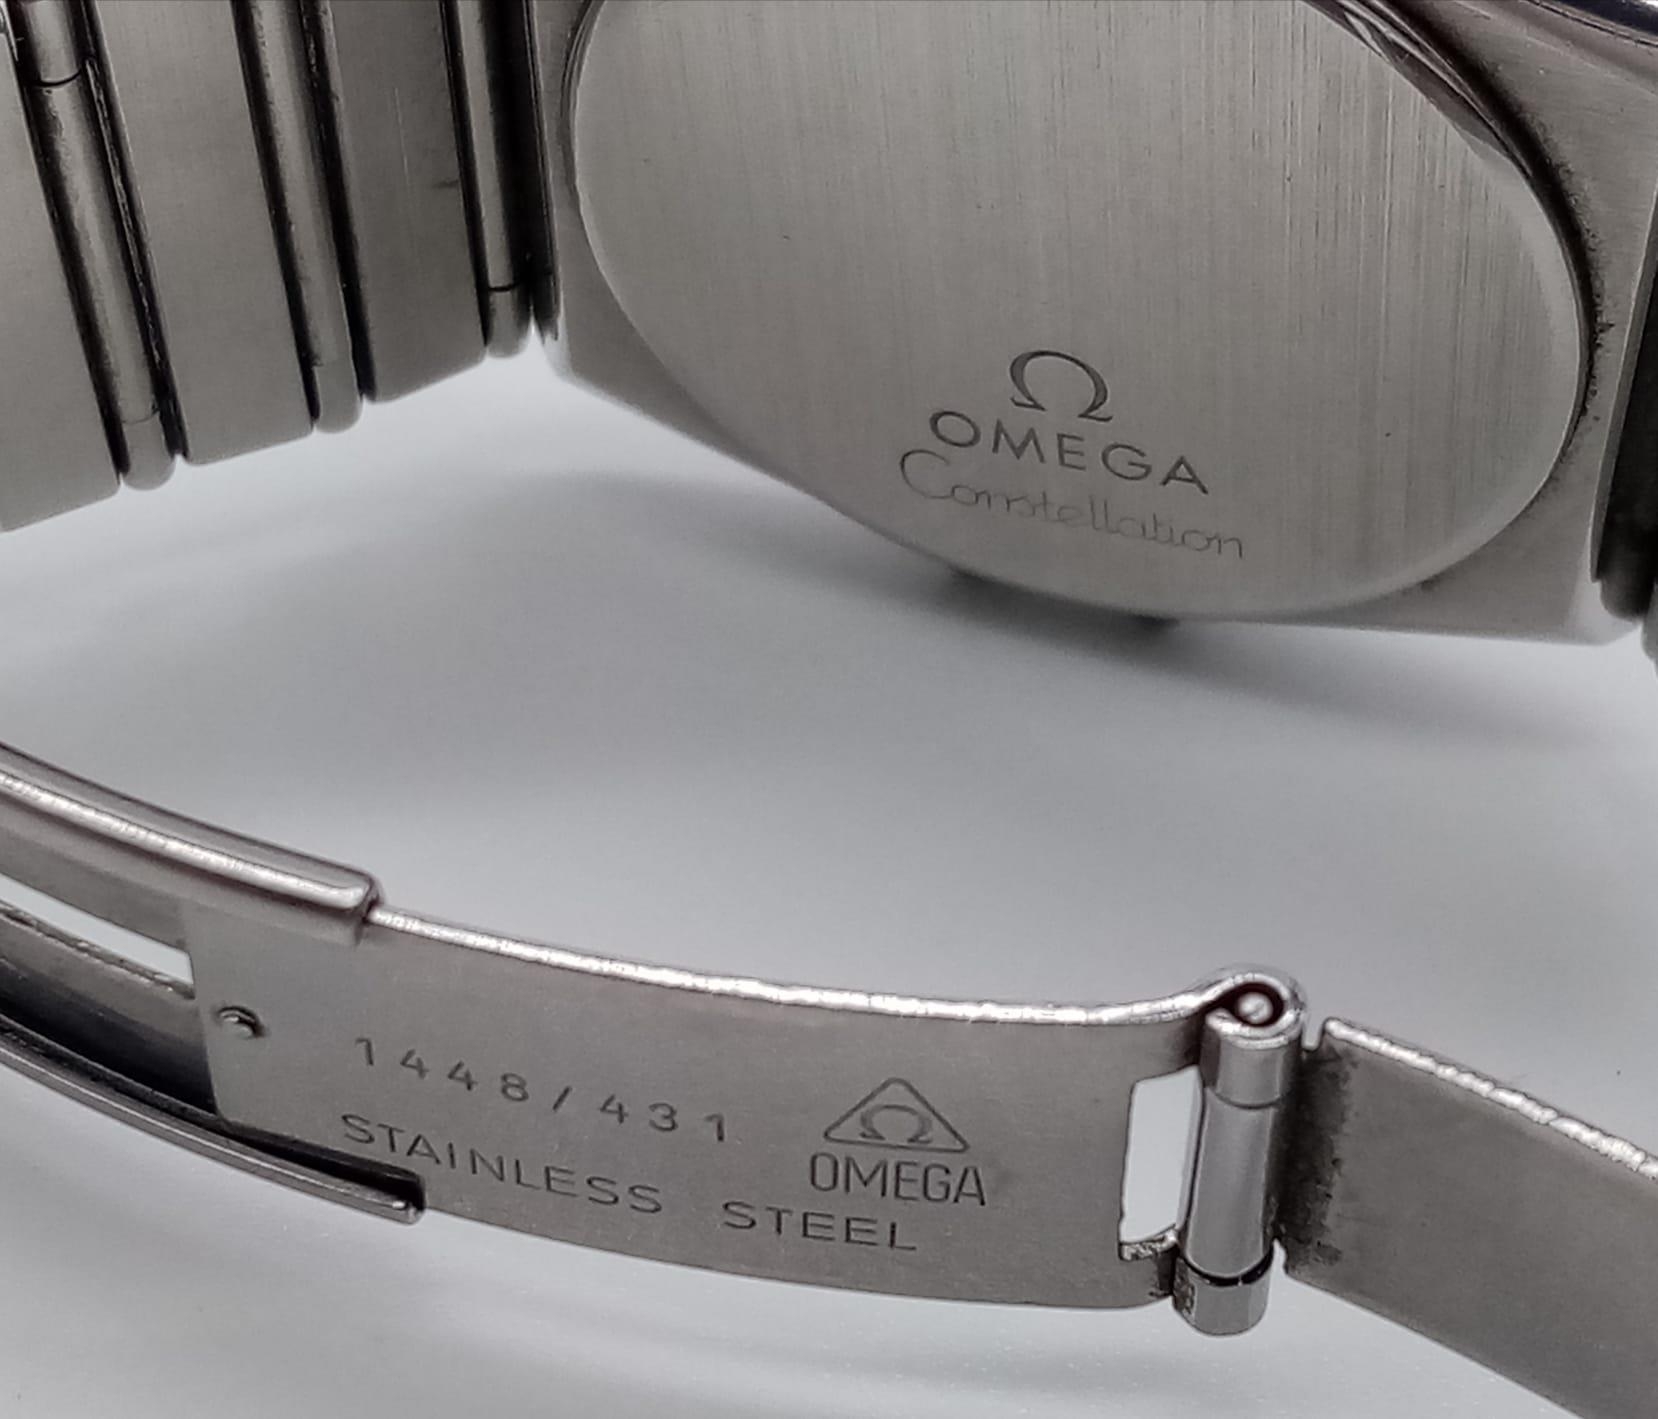 OMEGA CONSTELATION QUARTZ BRACELET WATCH WITH ORIGINAL BOX AND PAPERS. 32mm. Needs batteries. - Image 8 of 13